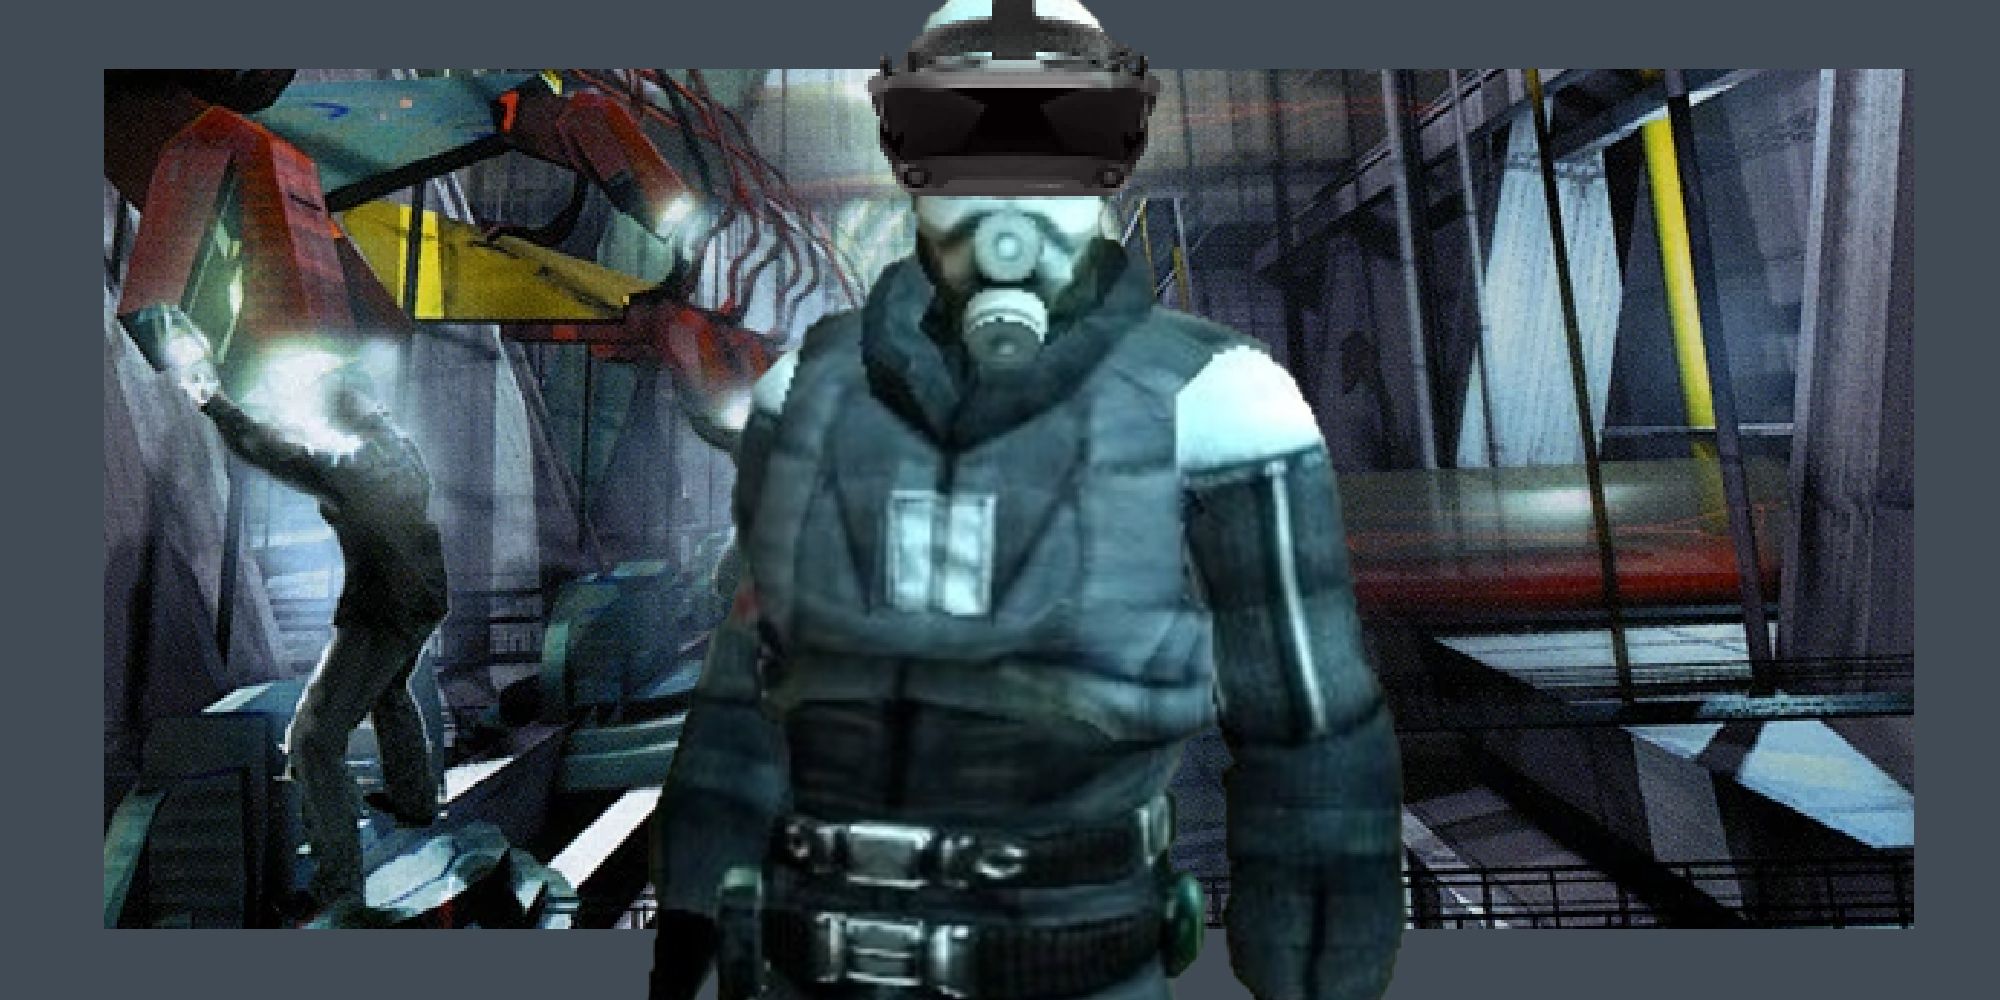 Is there a way to download the Half-Life 2: VR Mod onto the